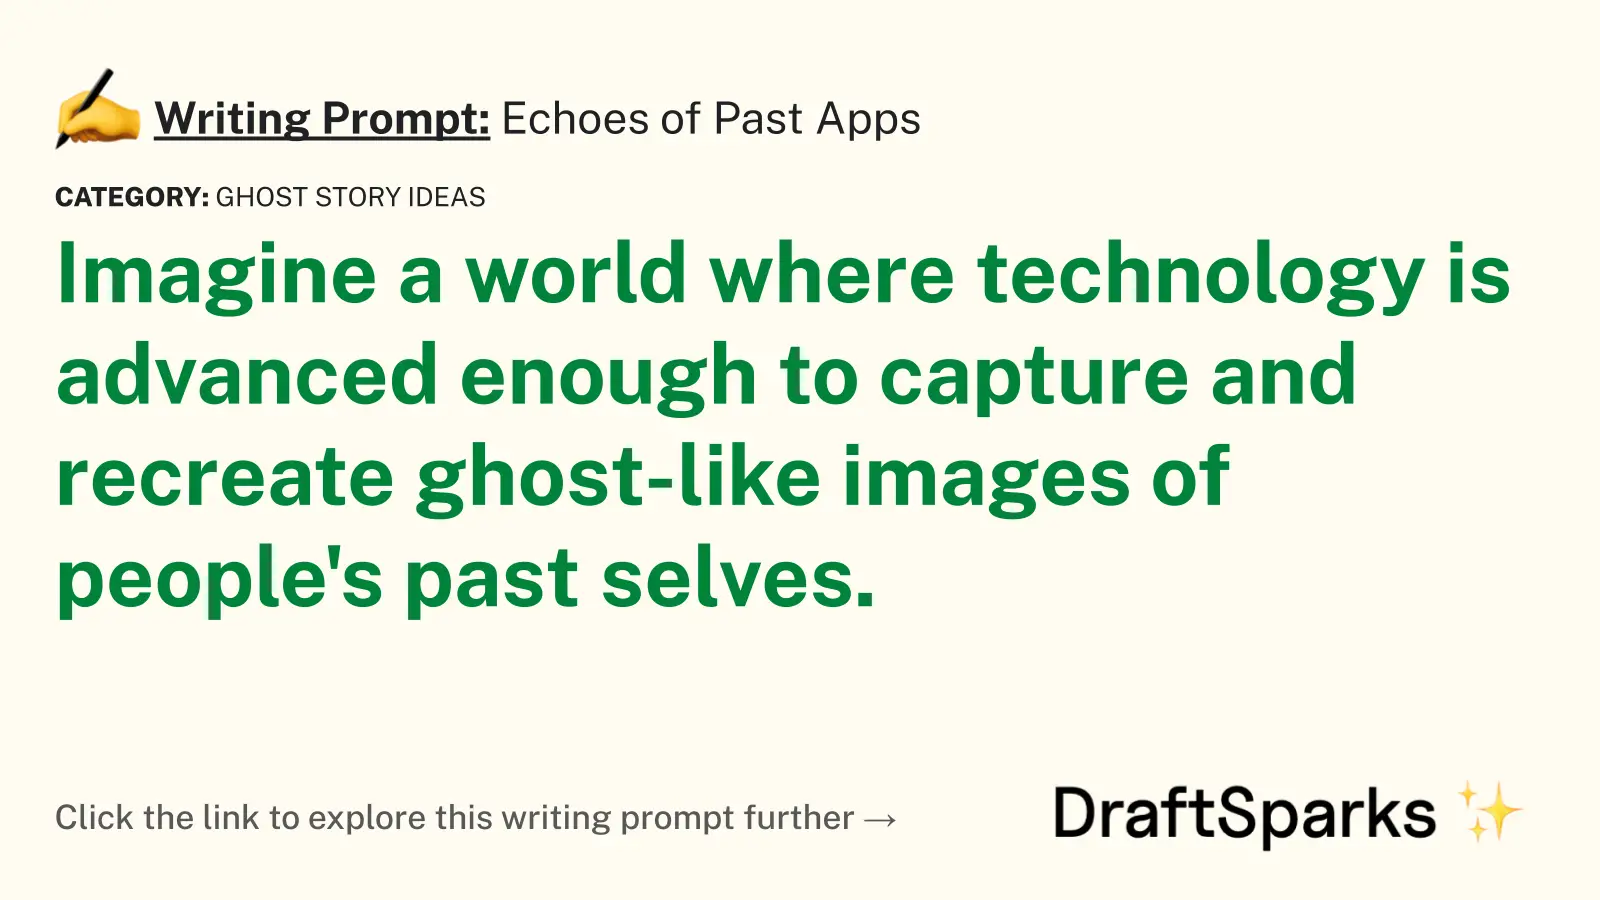 Echoes of Past Apps